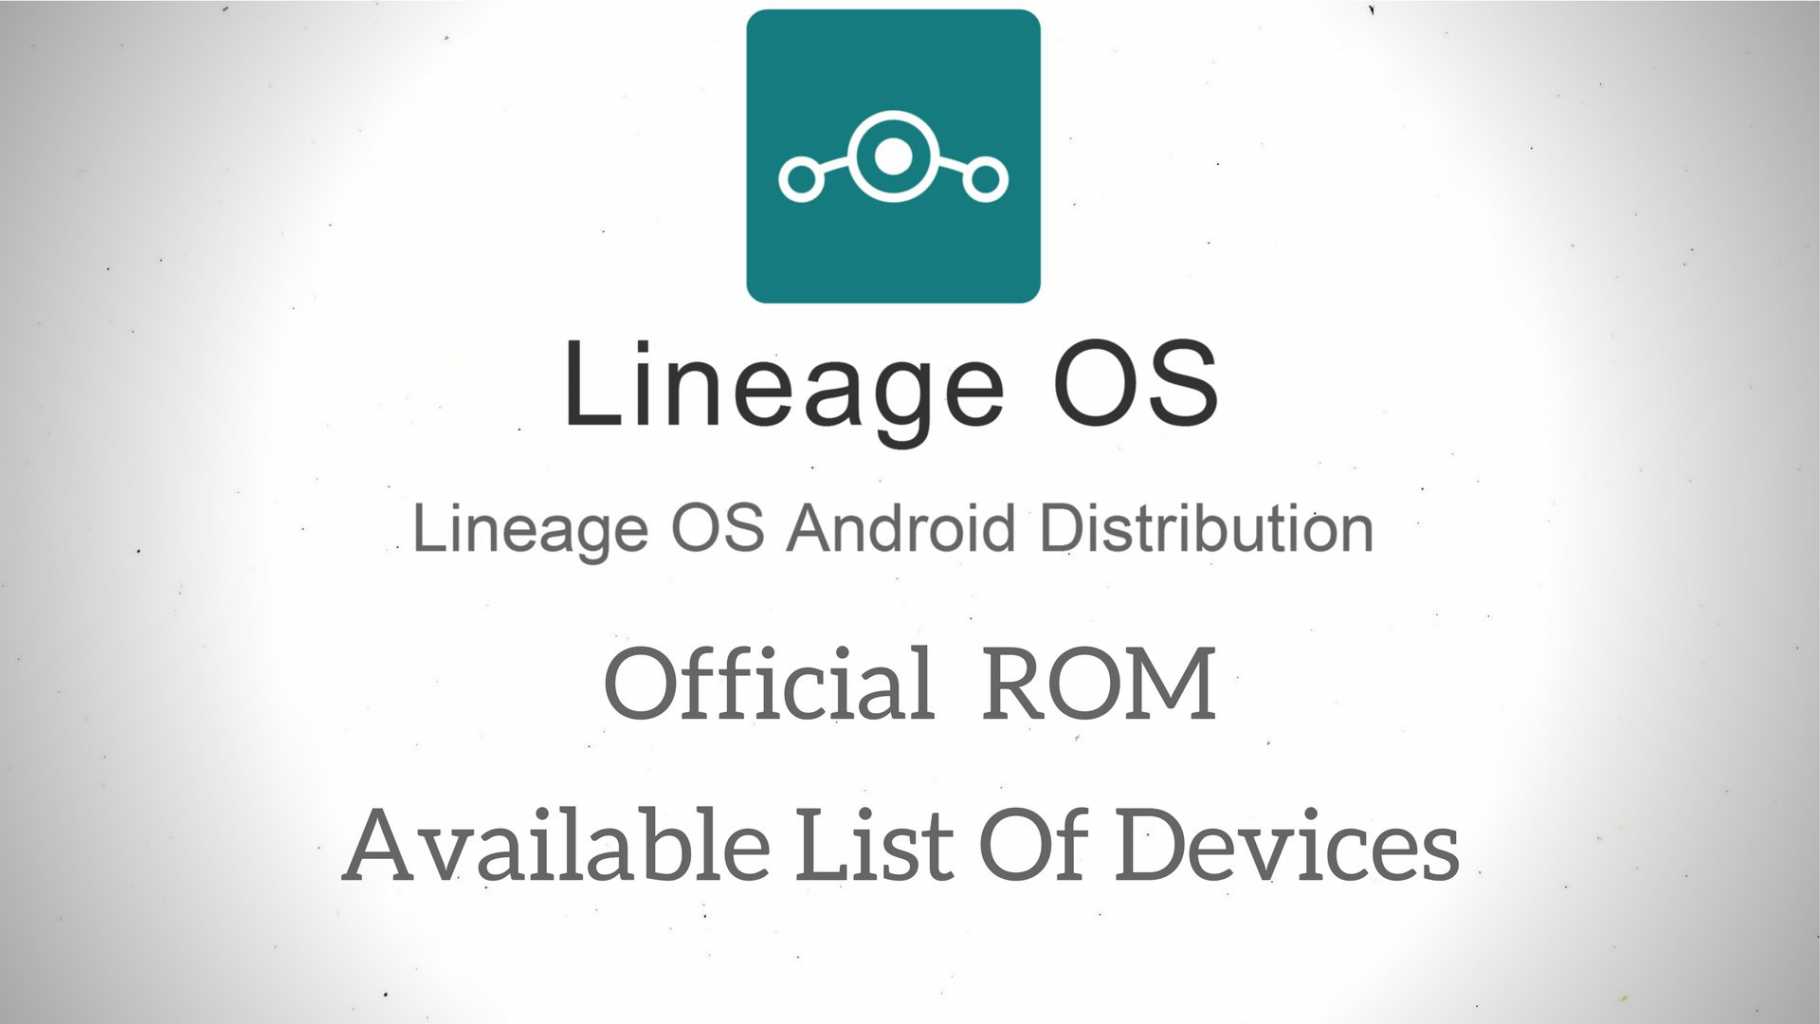 Official Lineage OS device Support List